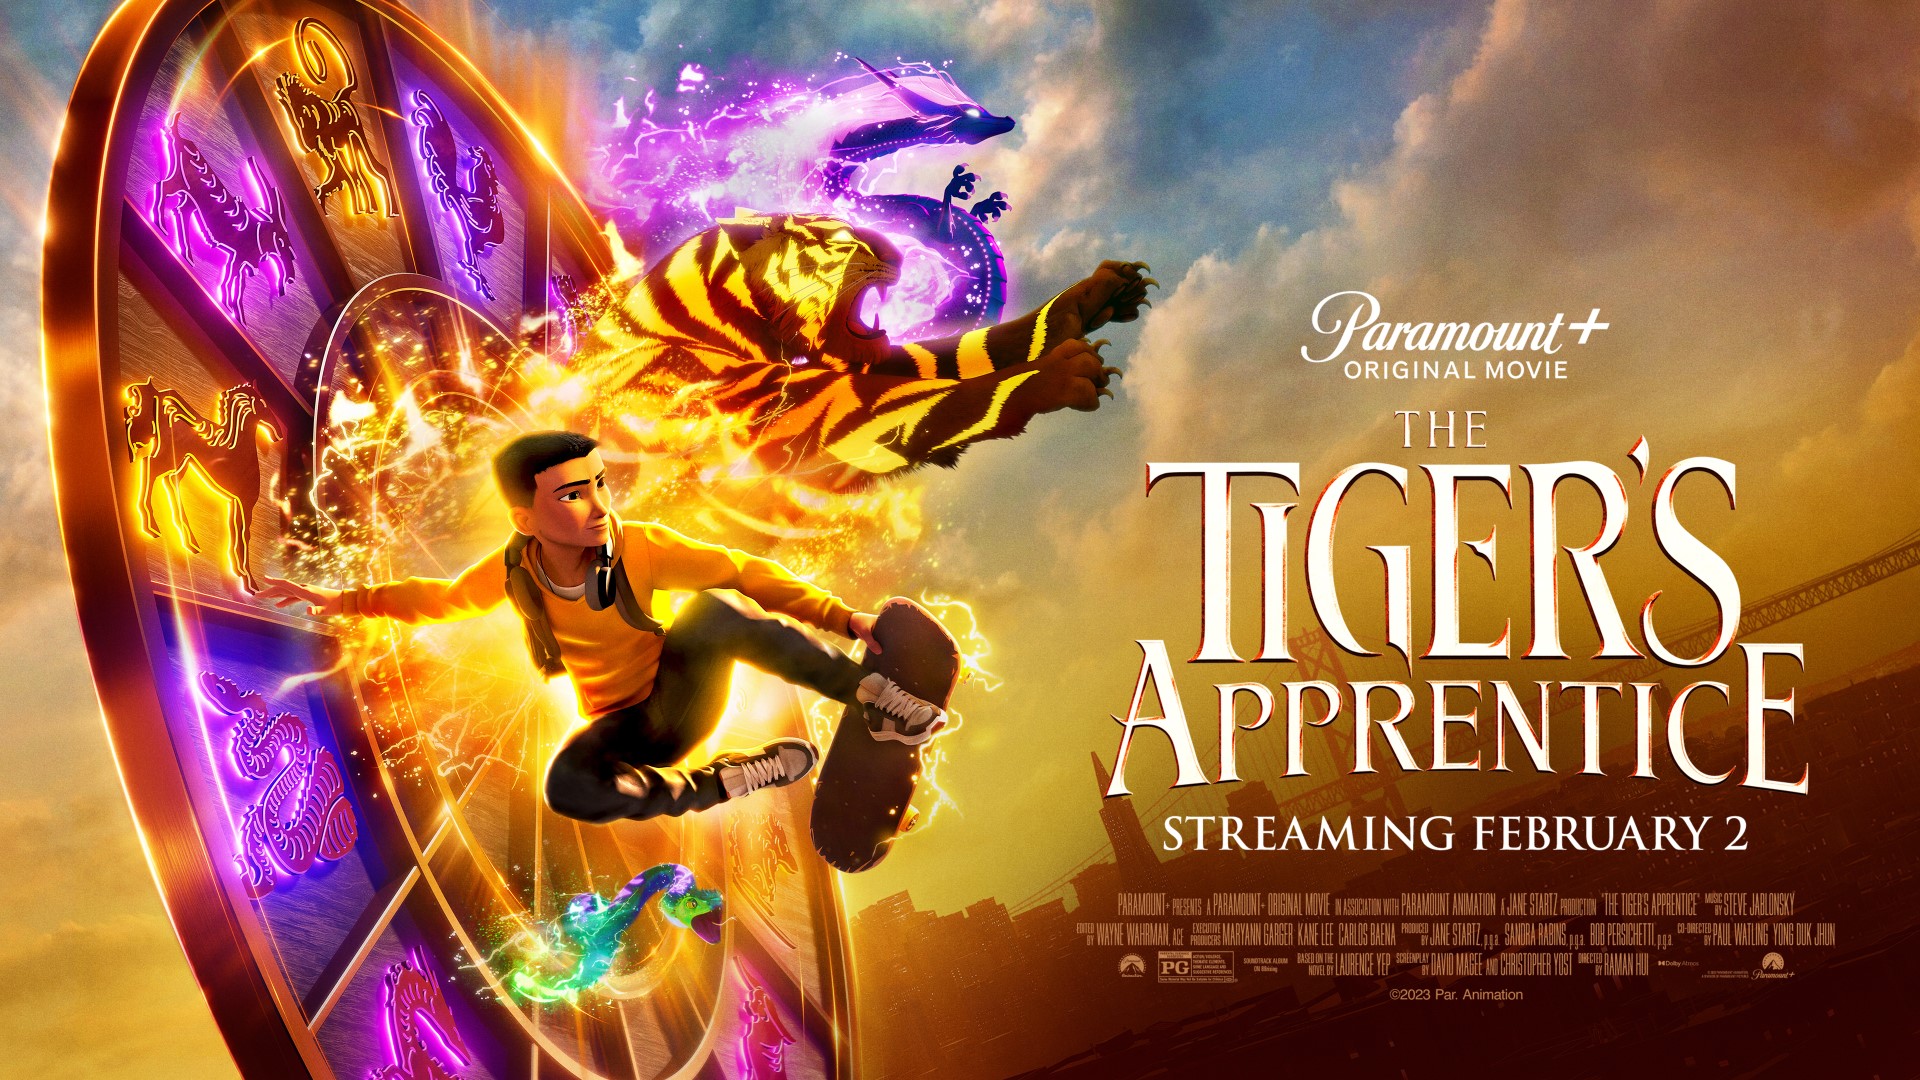 THE TIGER’S APPRENTICE Debuts Official Magical Trailer